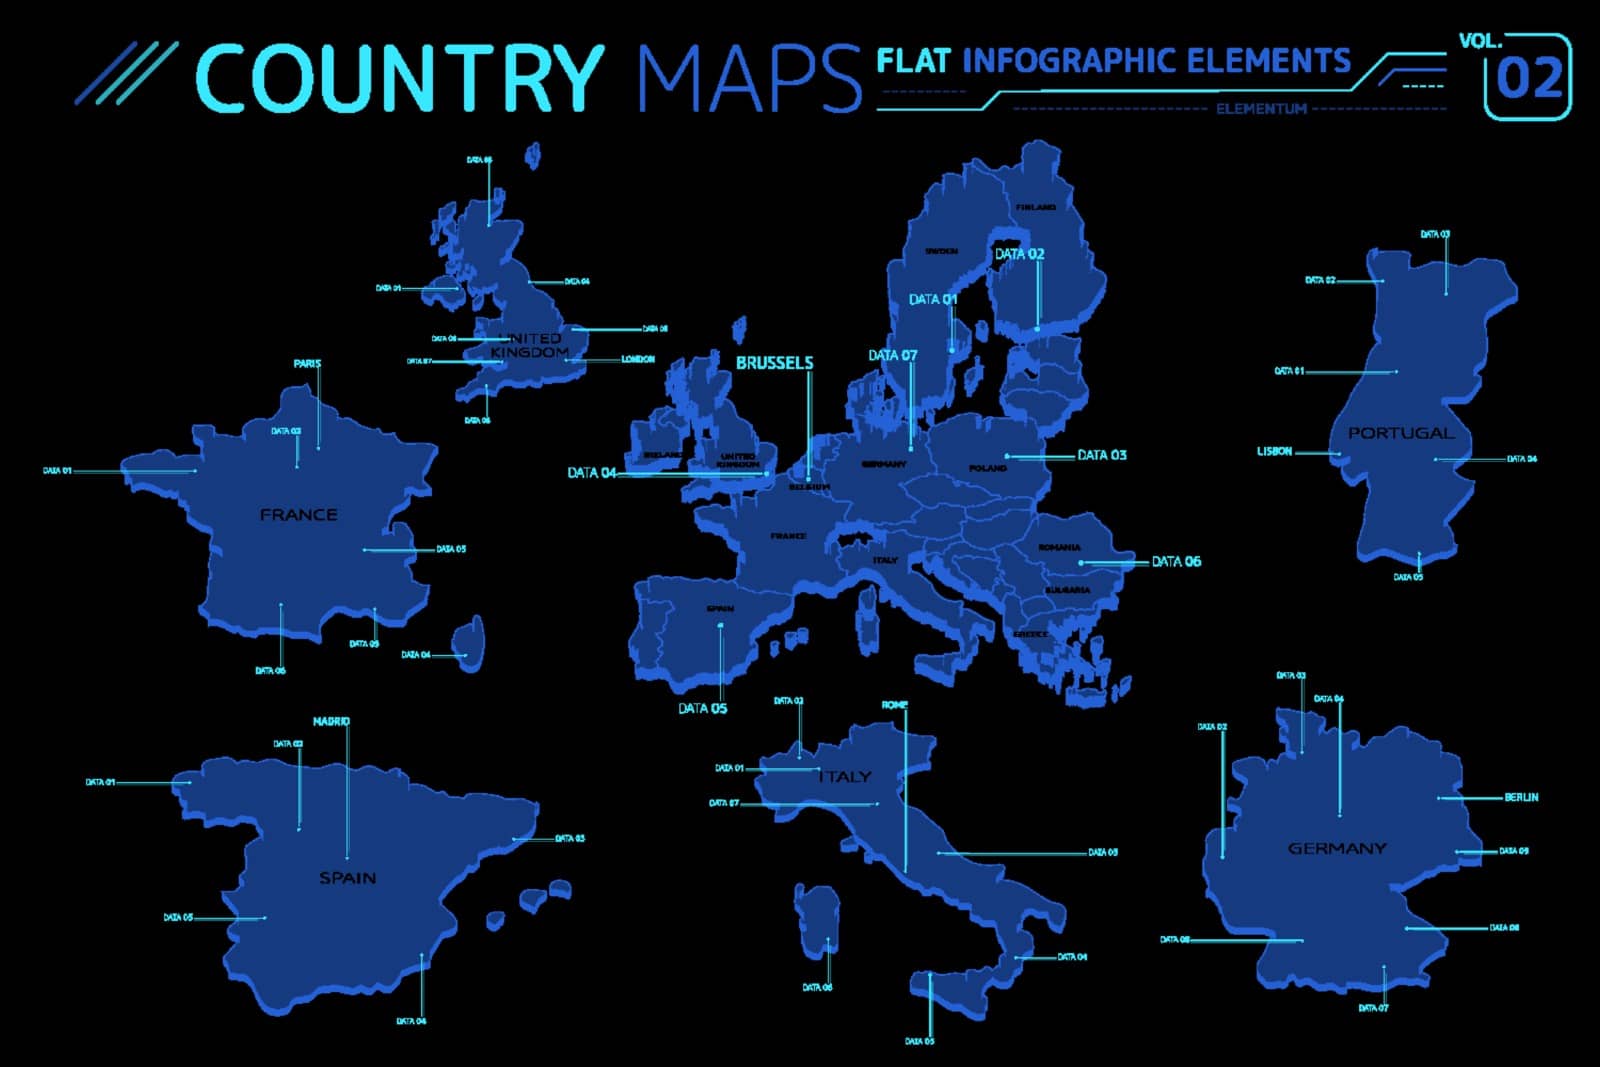 Flat vector maps collection with infographic elements.